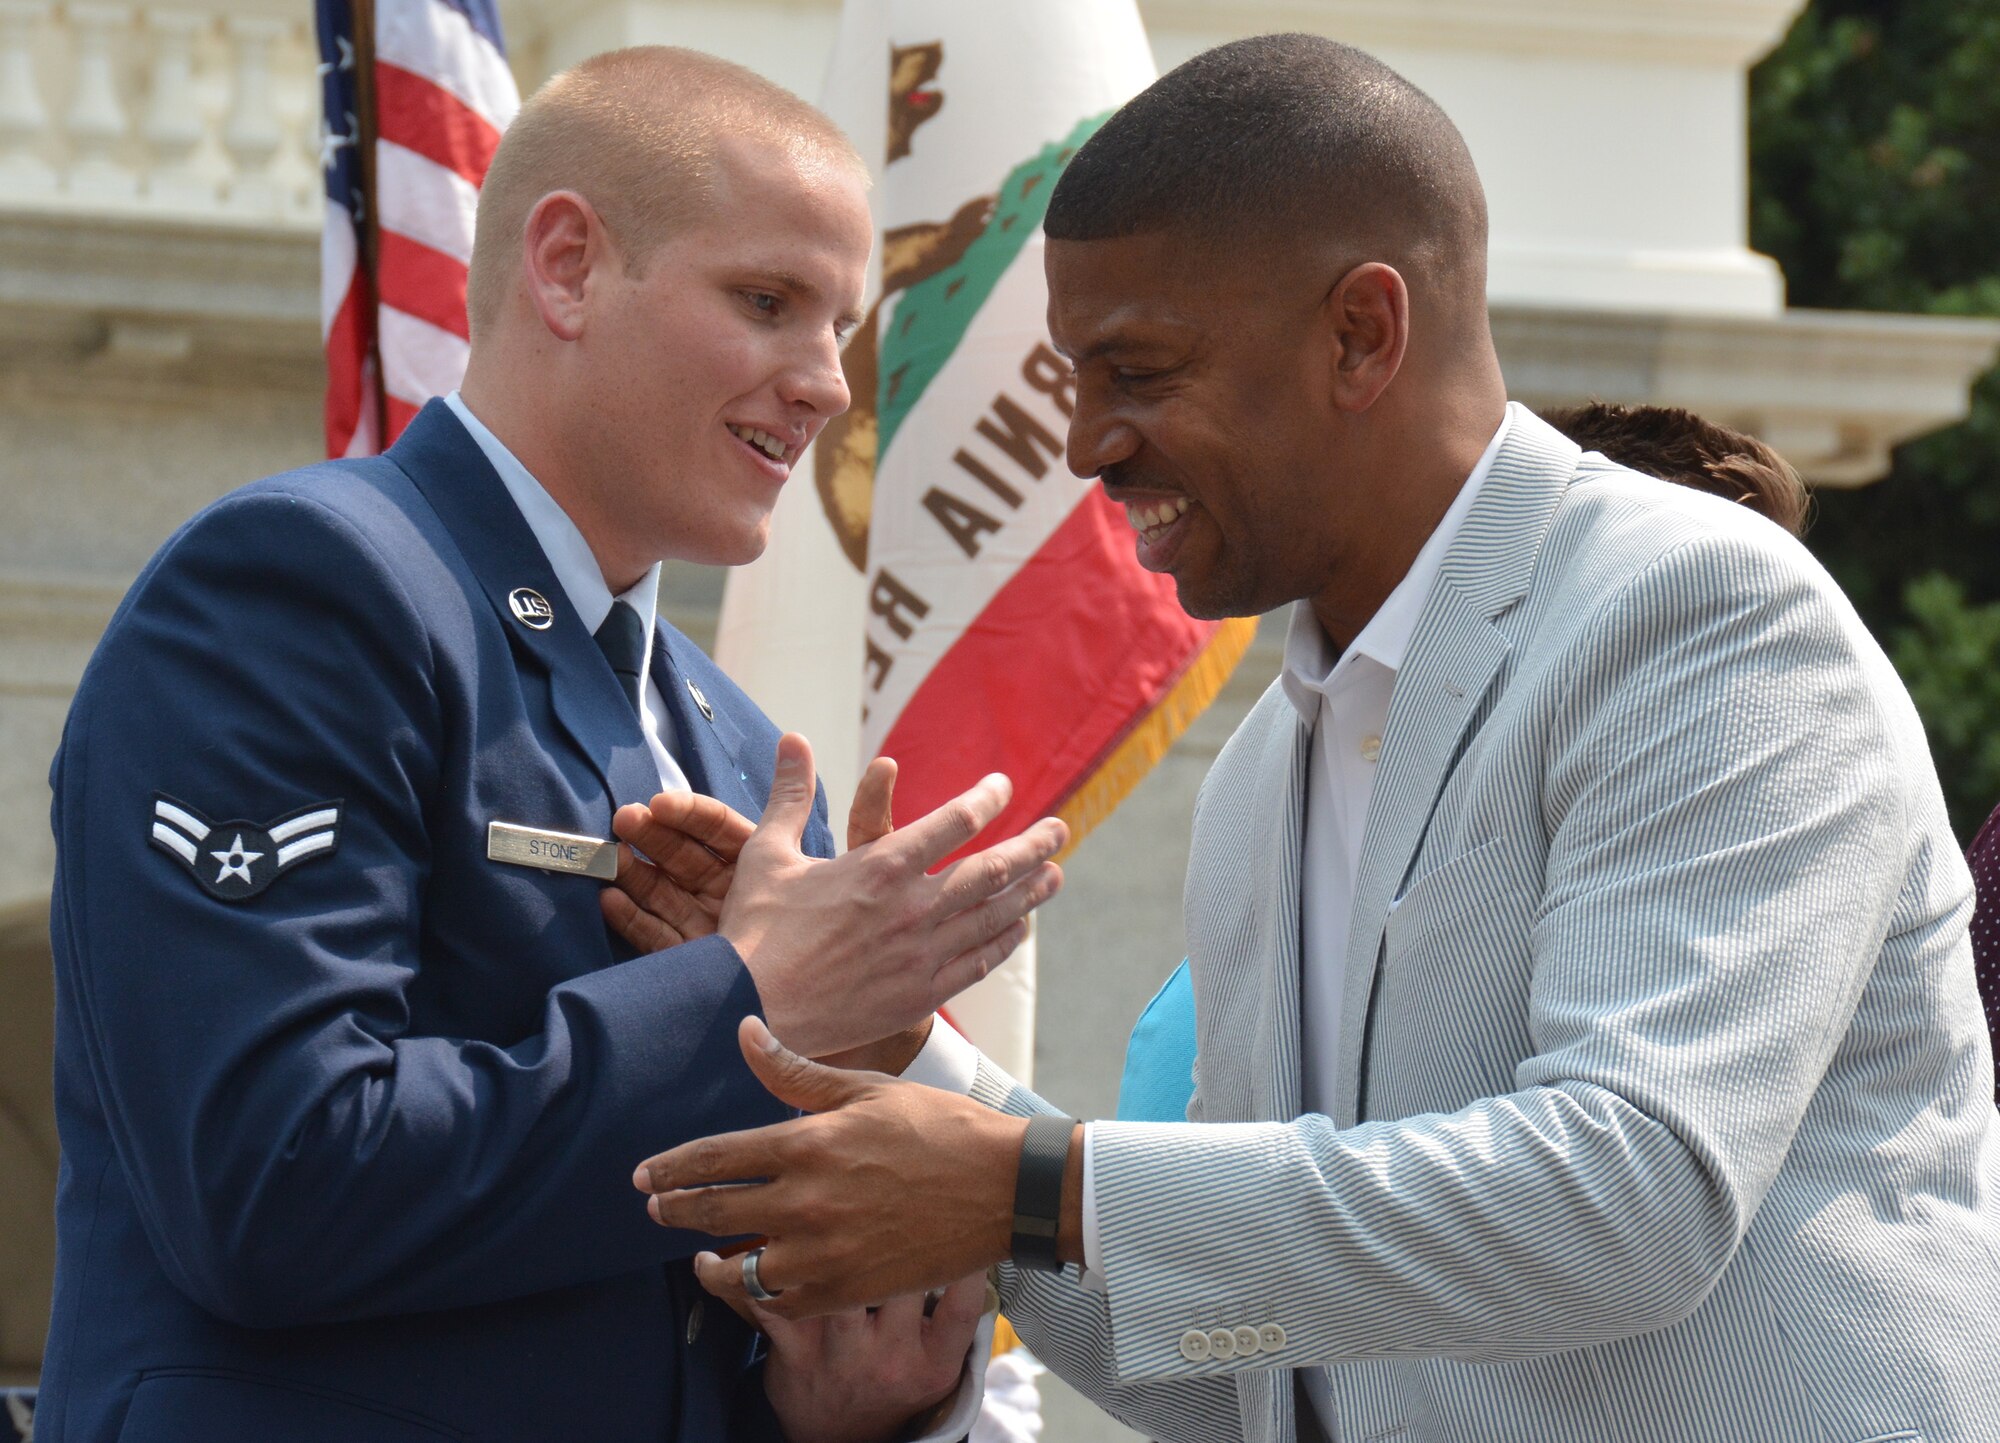 Airman 1st Class Spencer Stone is greeted by Sacramento Mayor Kevin Johnson during the Sacramento Hometown Heroes Parade and festivities at the state capitol building in downtown Sacramento, California, Sept. 11, 2015. (U.S. Air Force photo/2nd Lt. Stephen Collier)